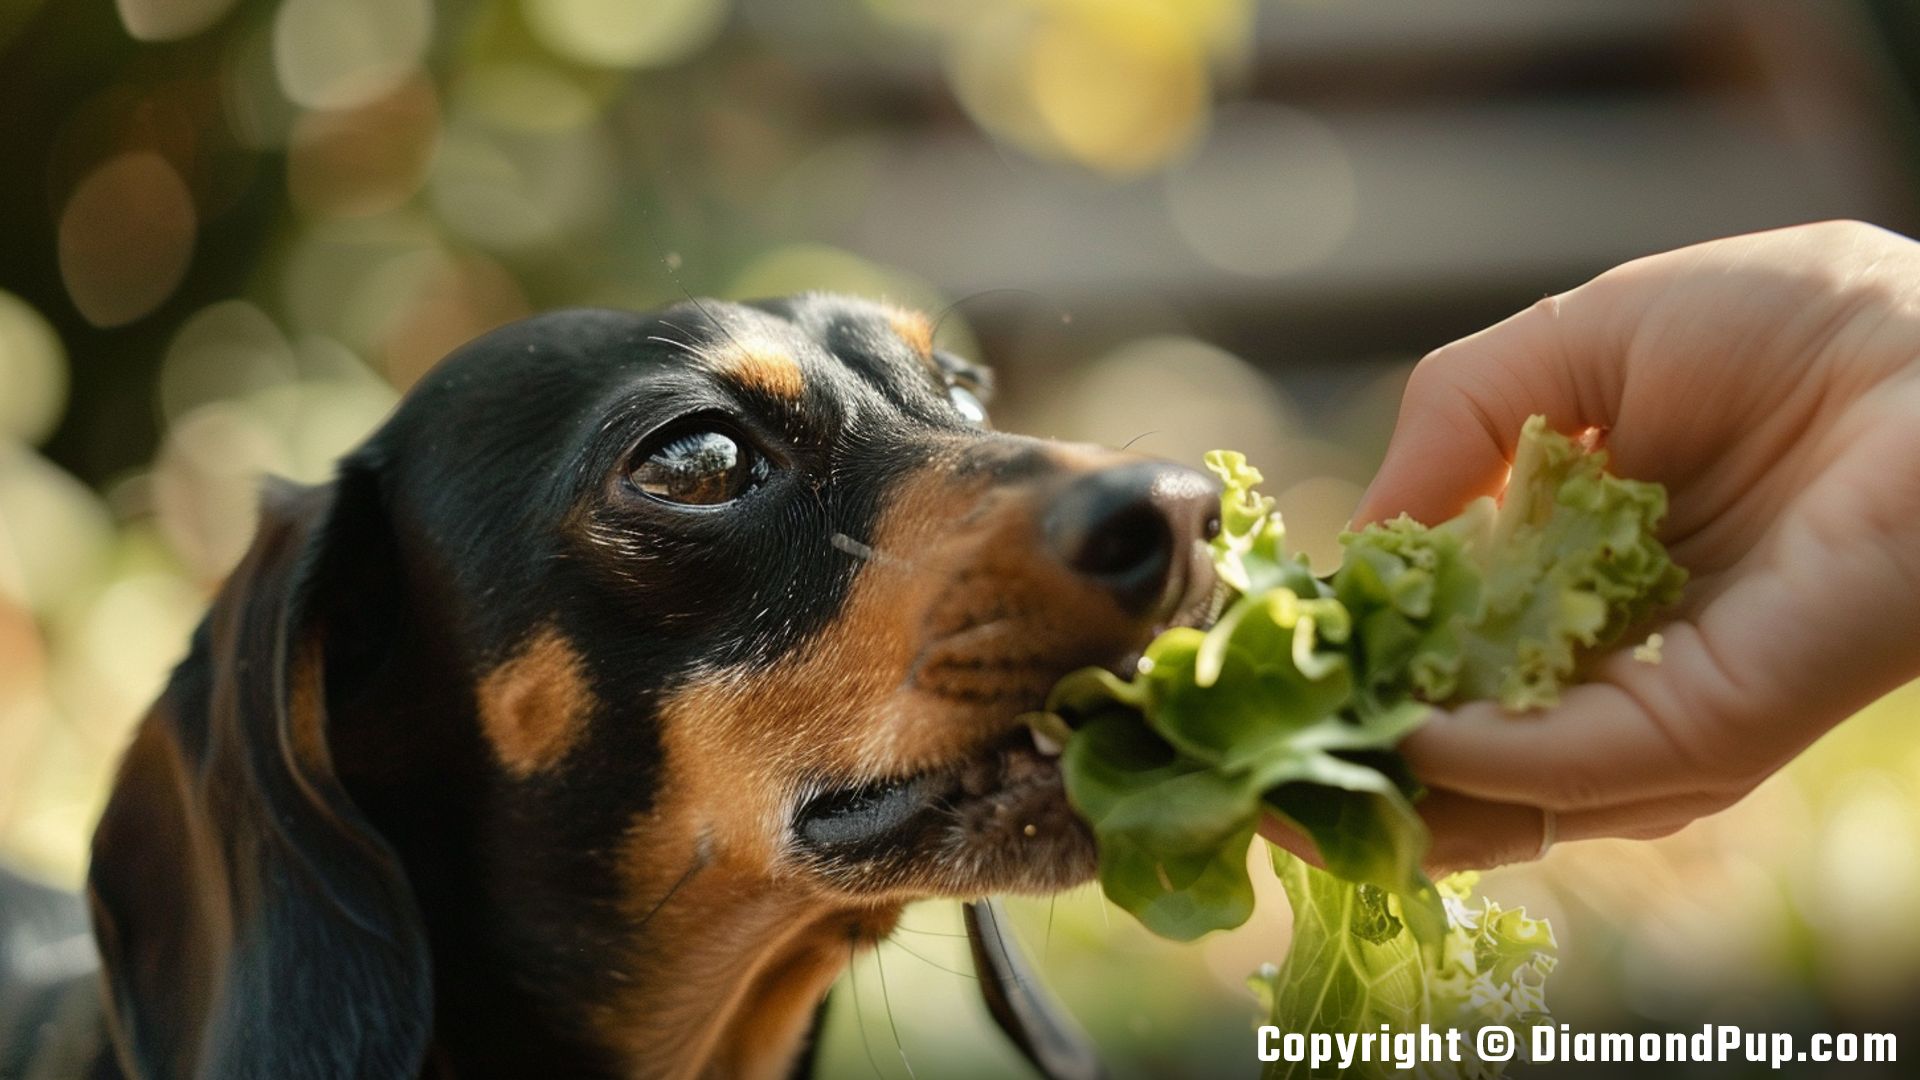 Photo of an Adorable Dachshund Eating Lettuce